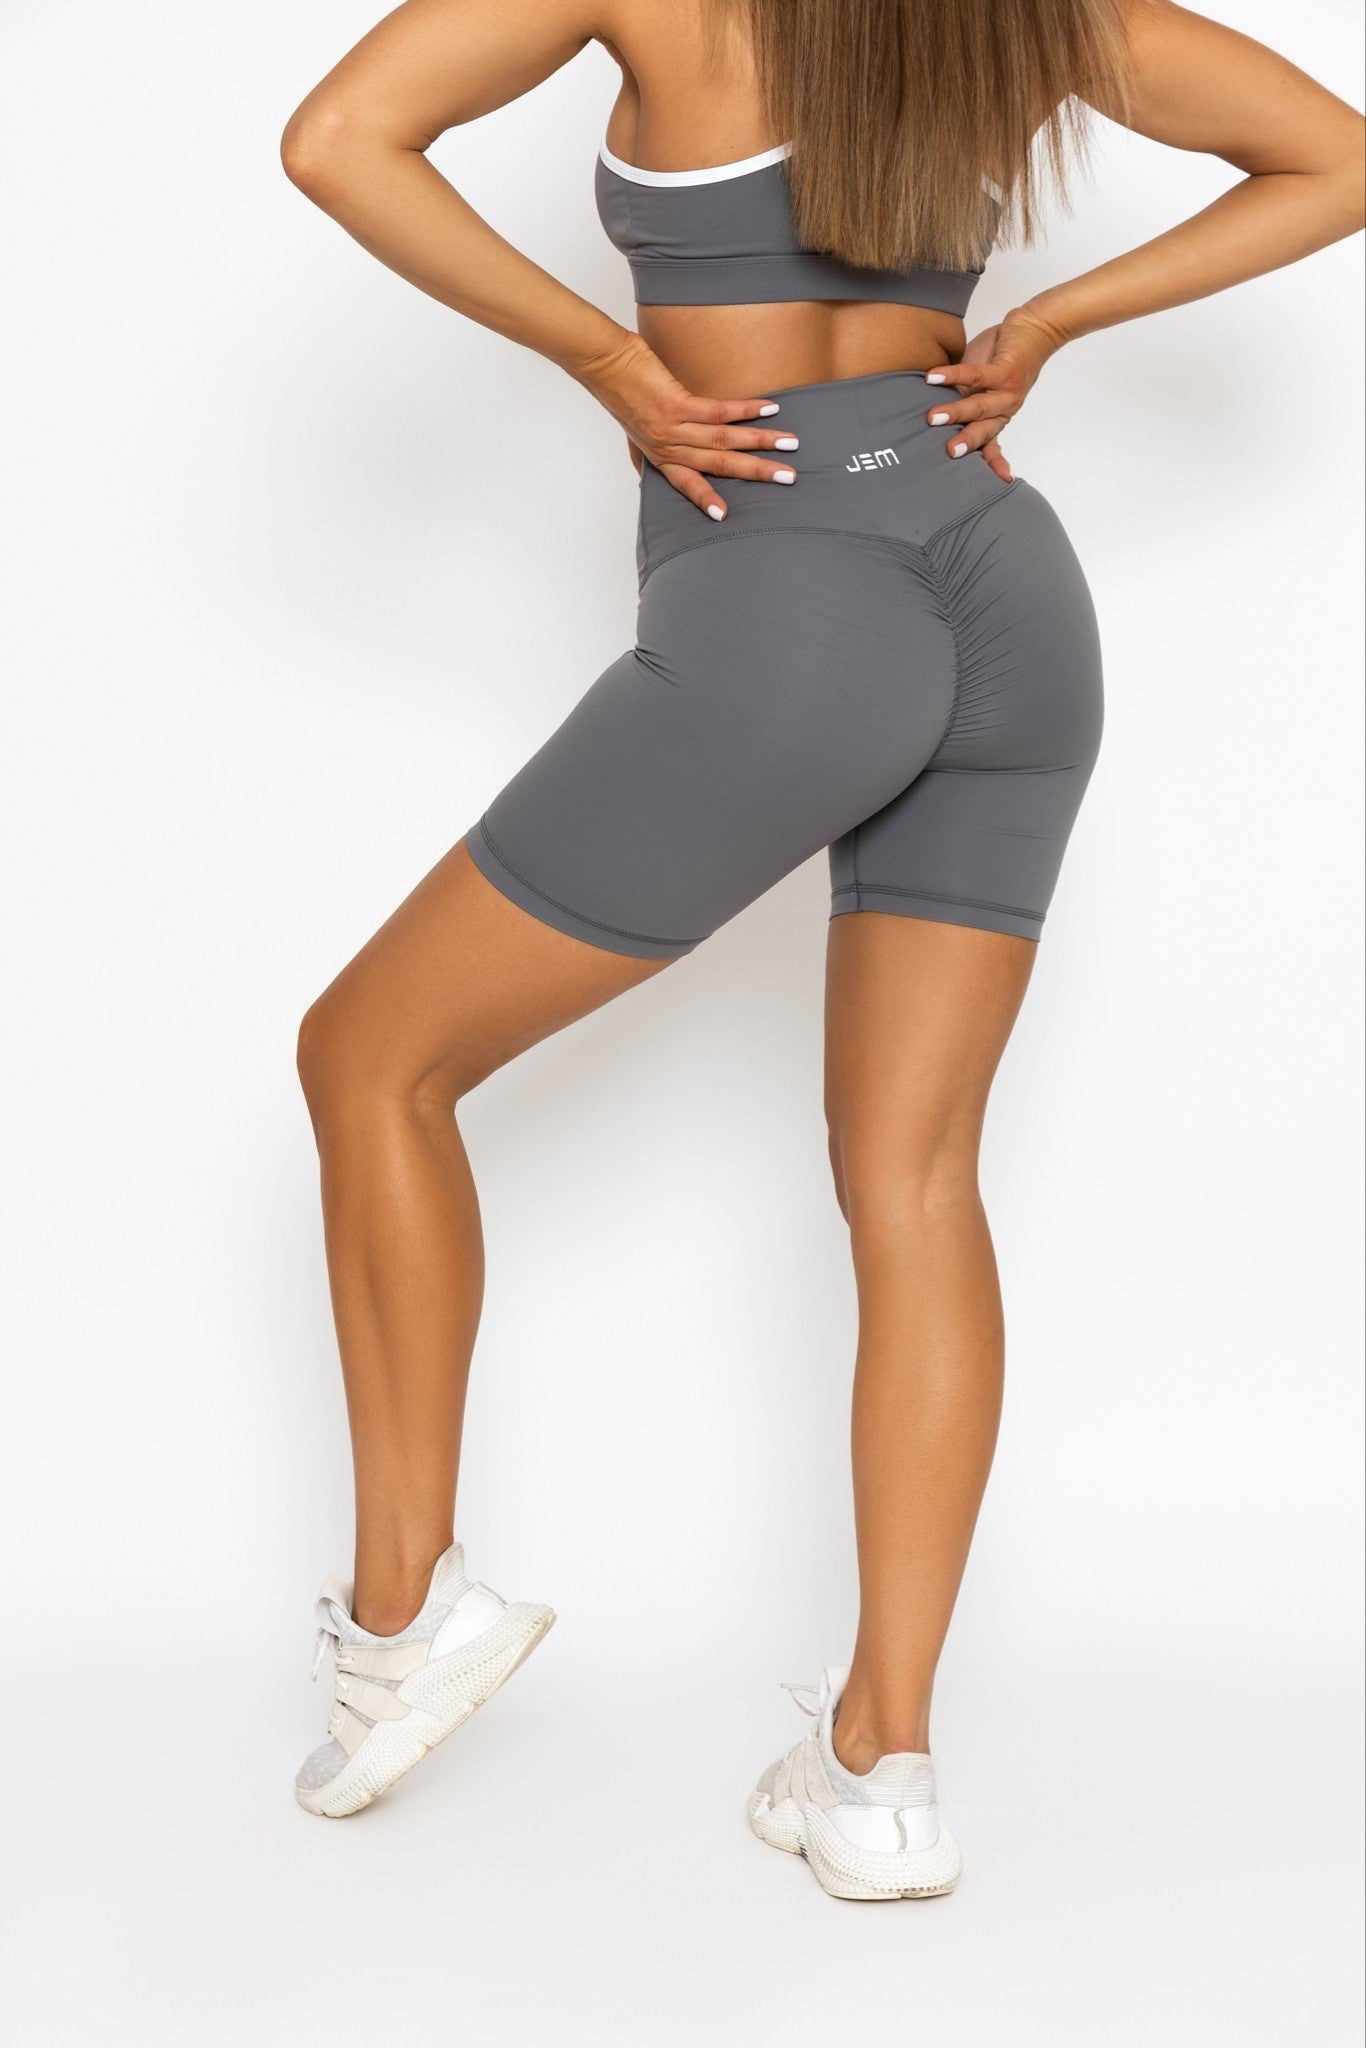 JEM Sporting Booty Shorts Essential Scrunch Shorts - Charcoal